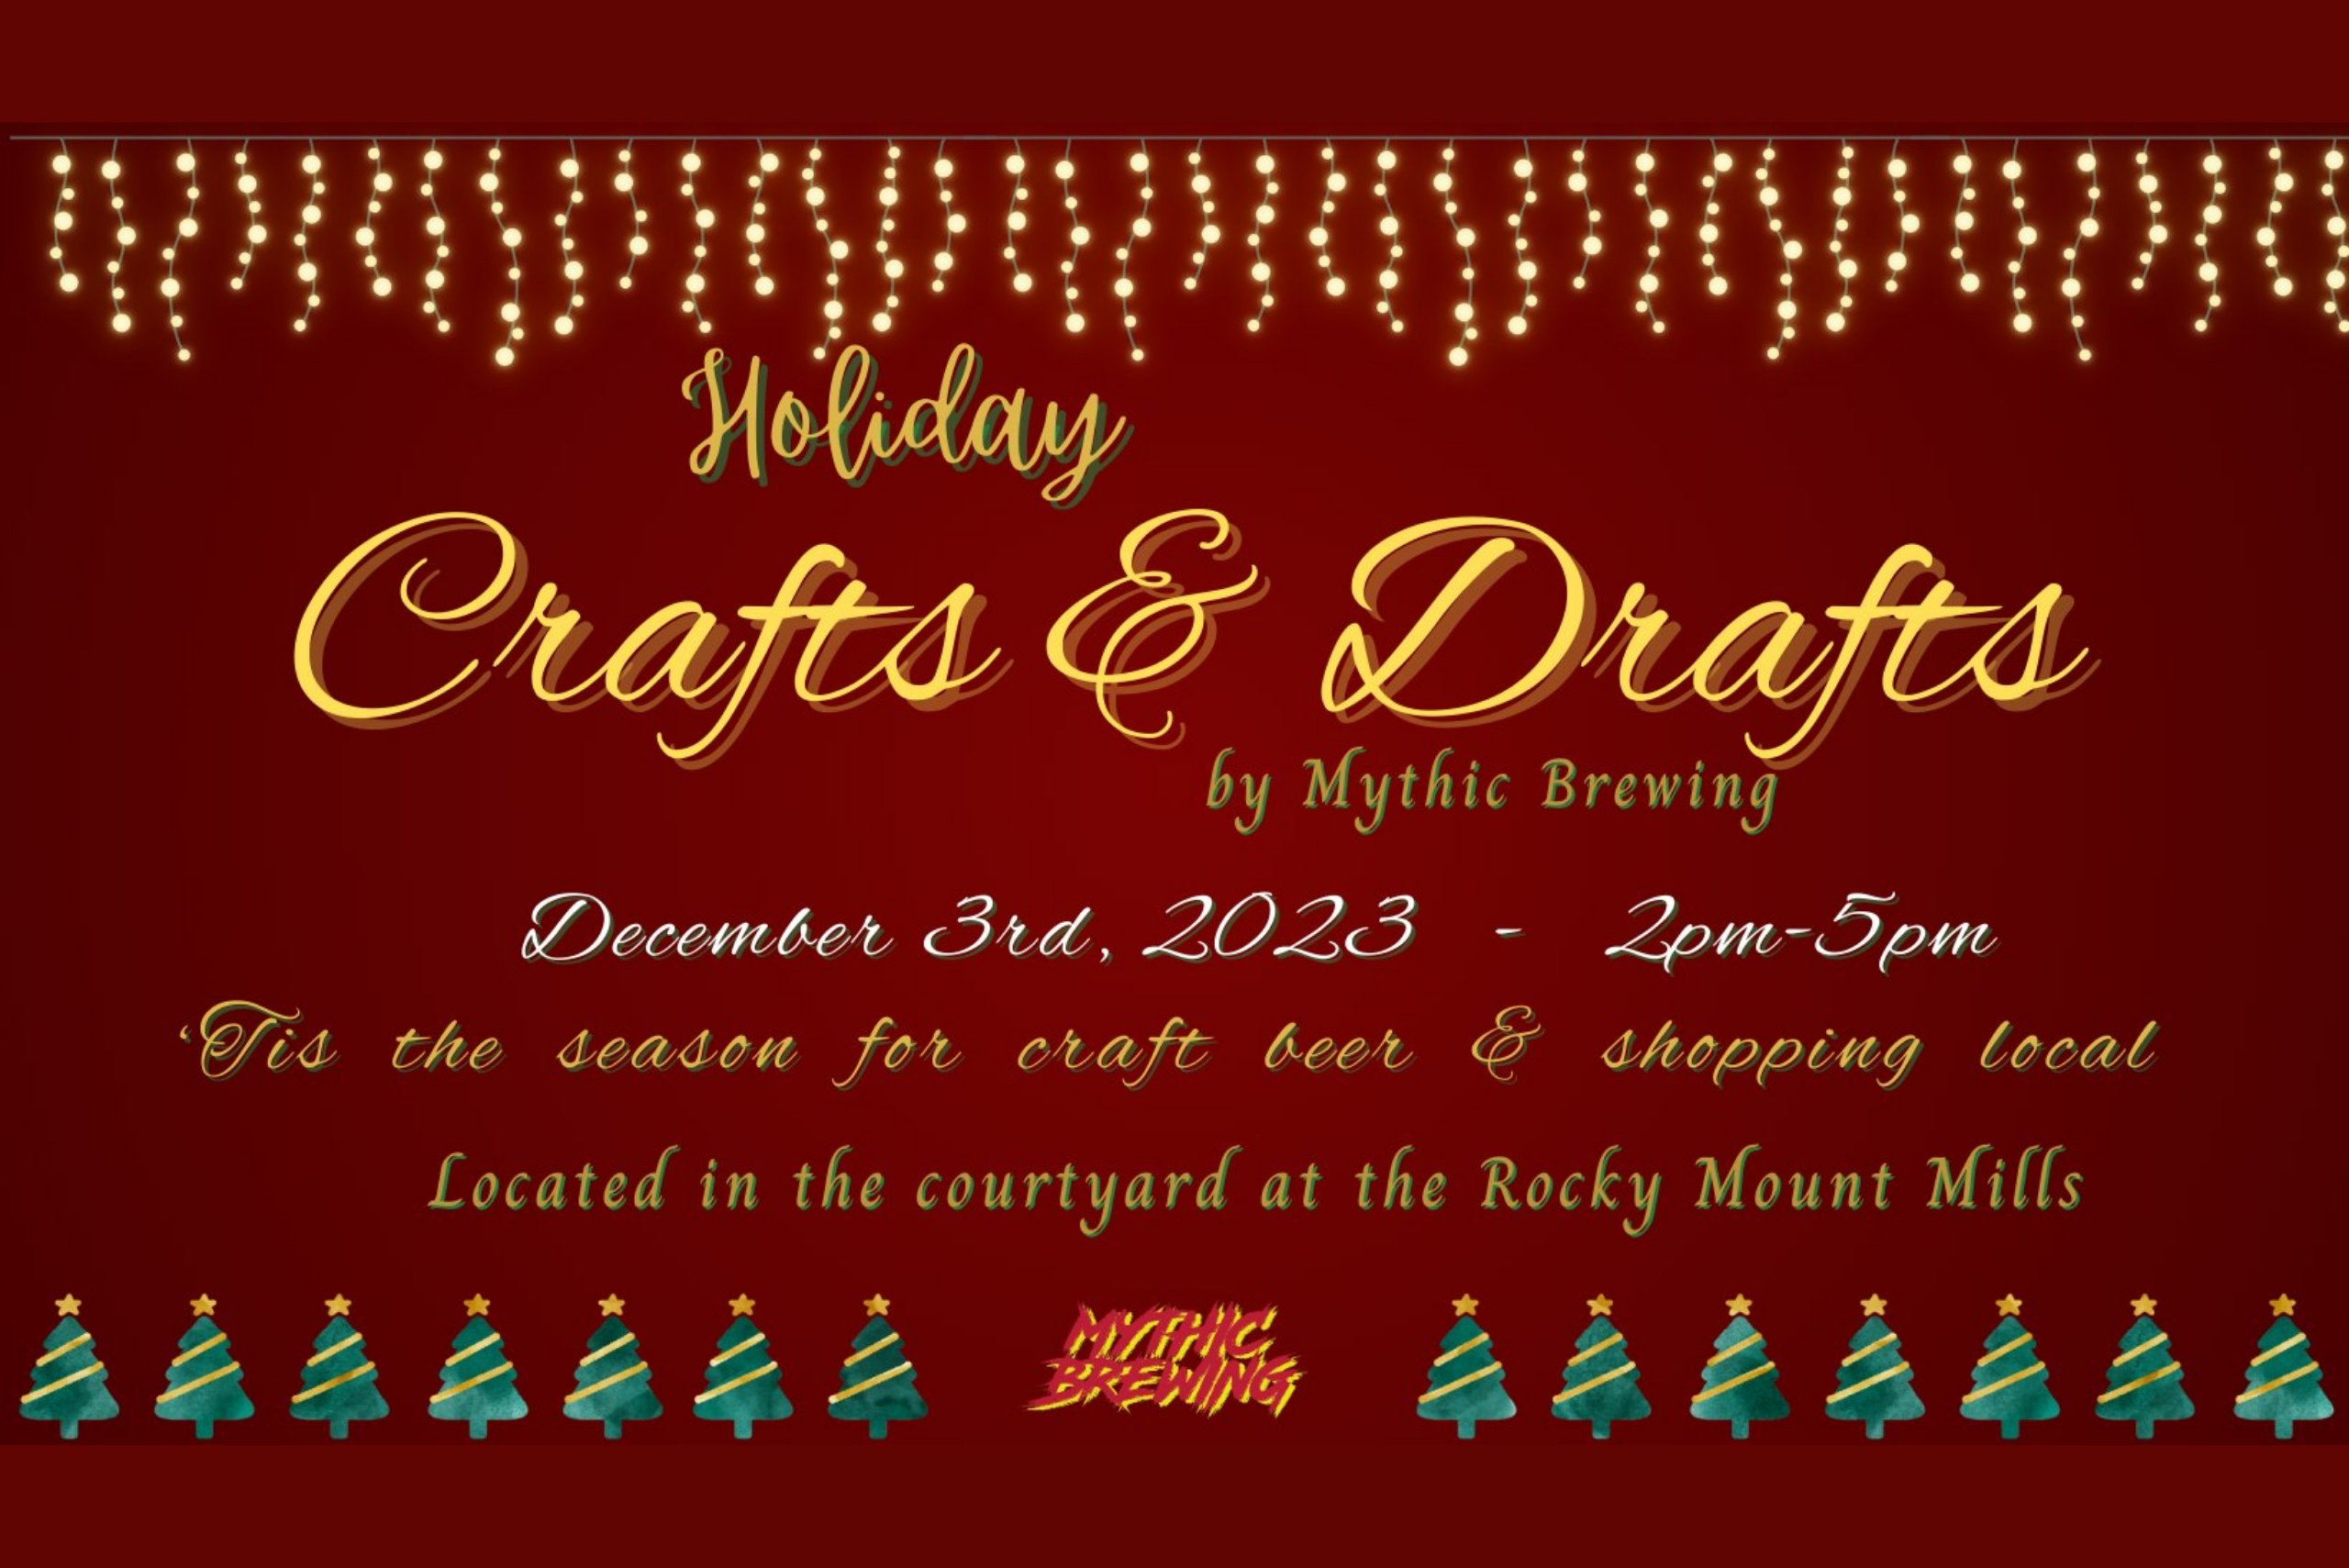 Holiday Crafts and Drafts - Mythic Brewing